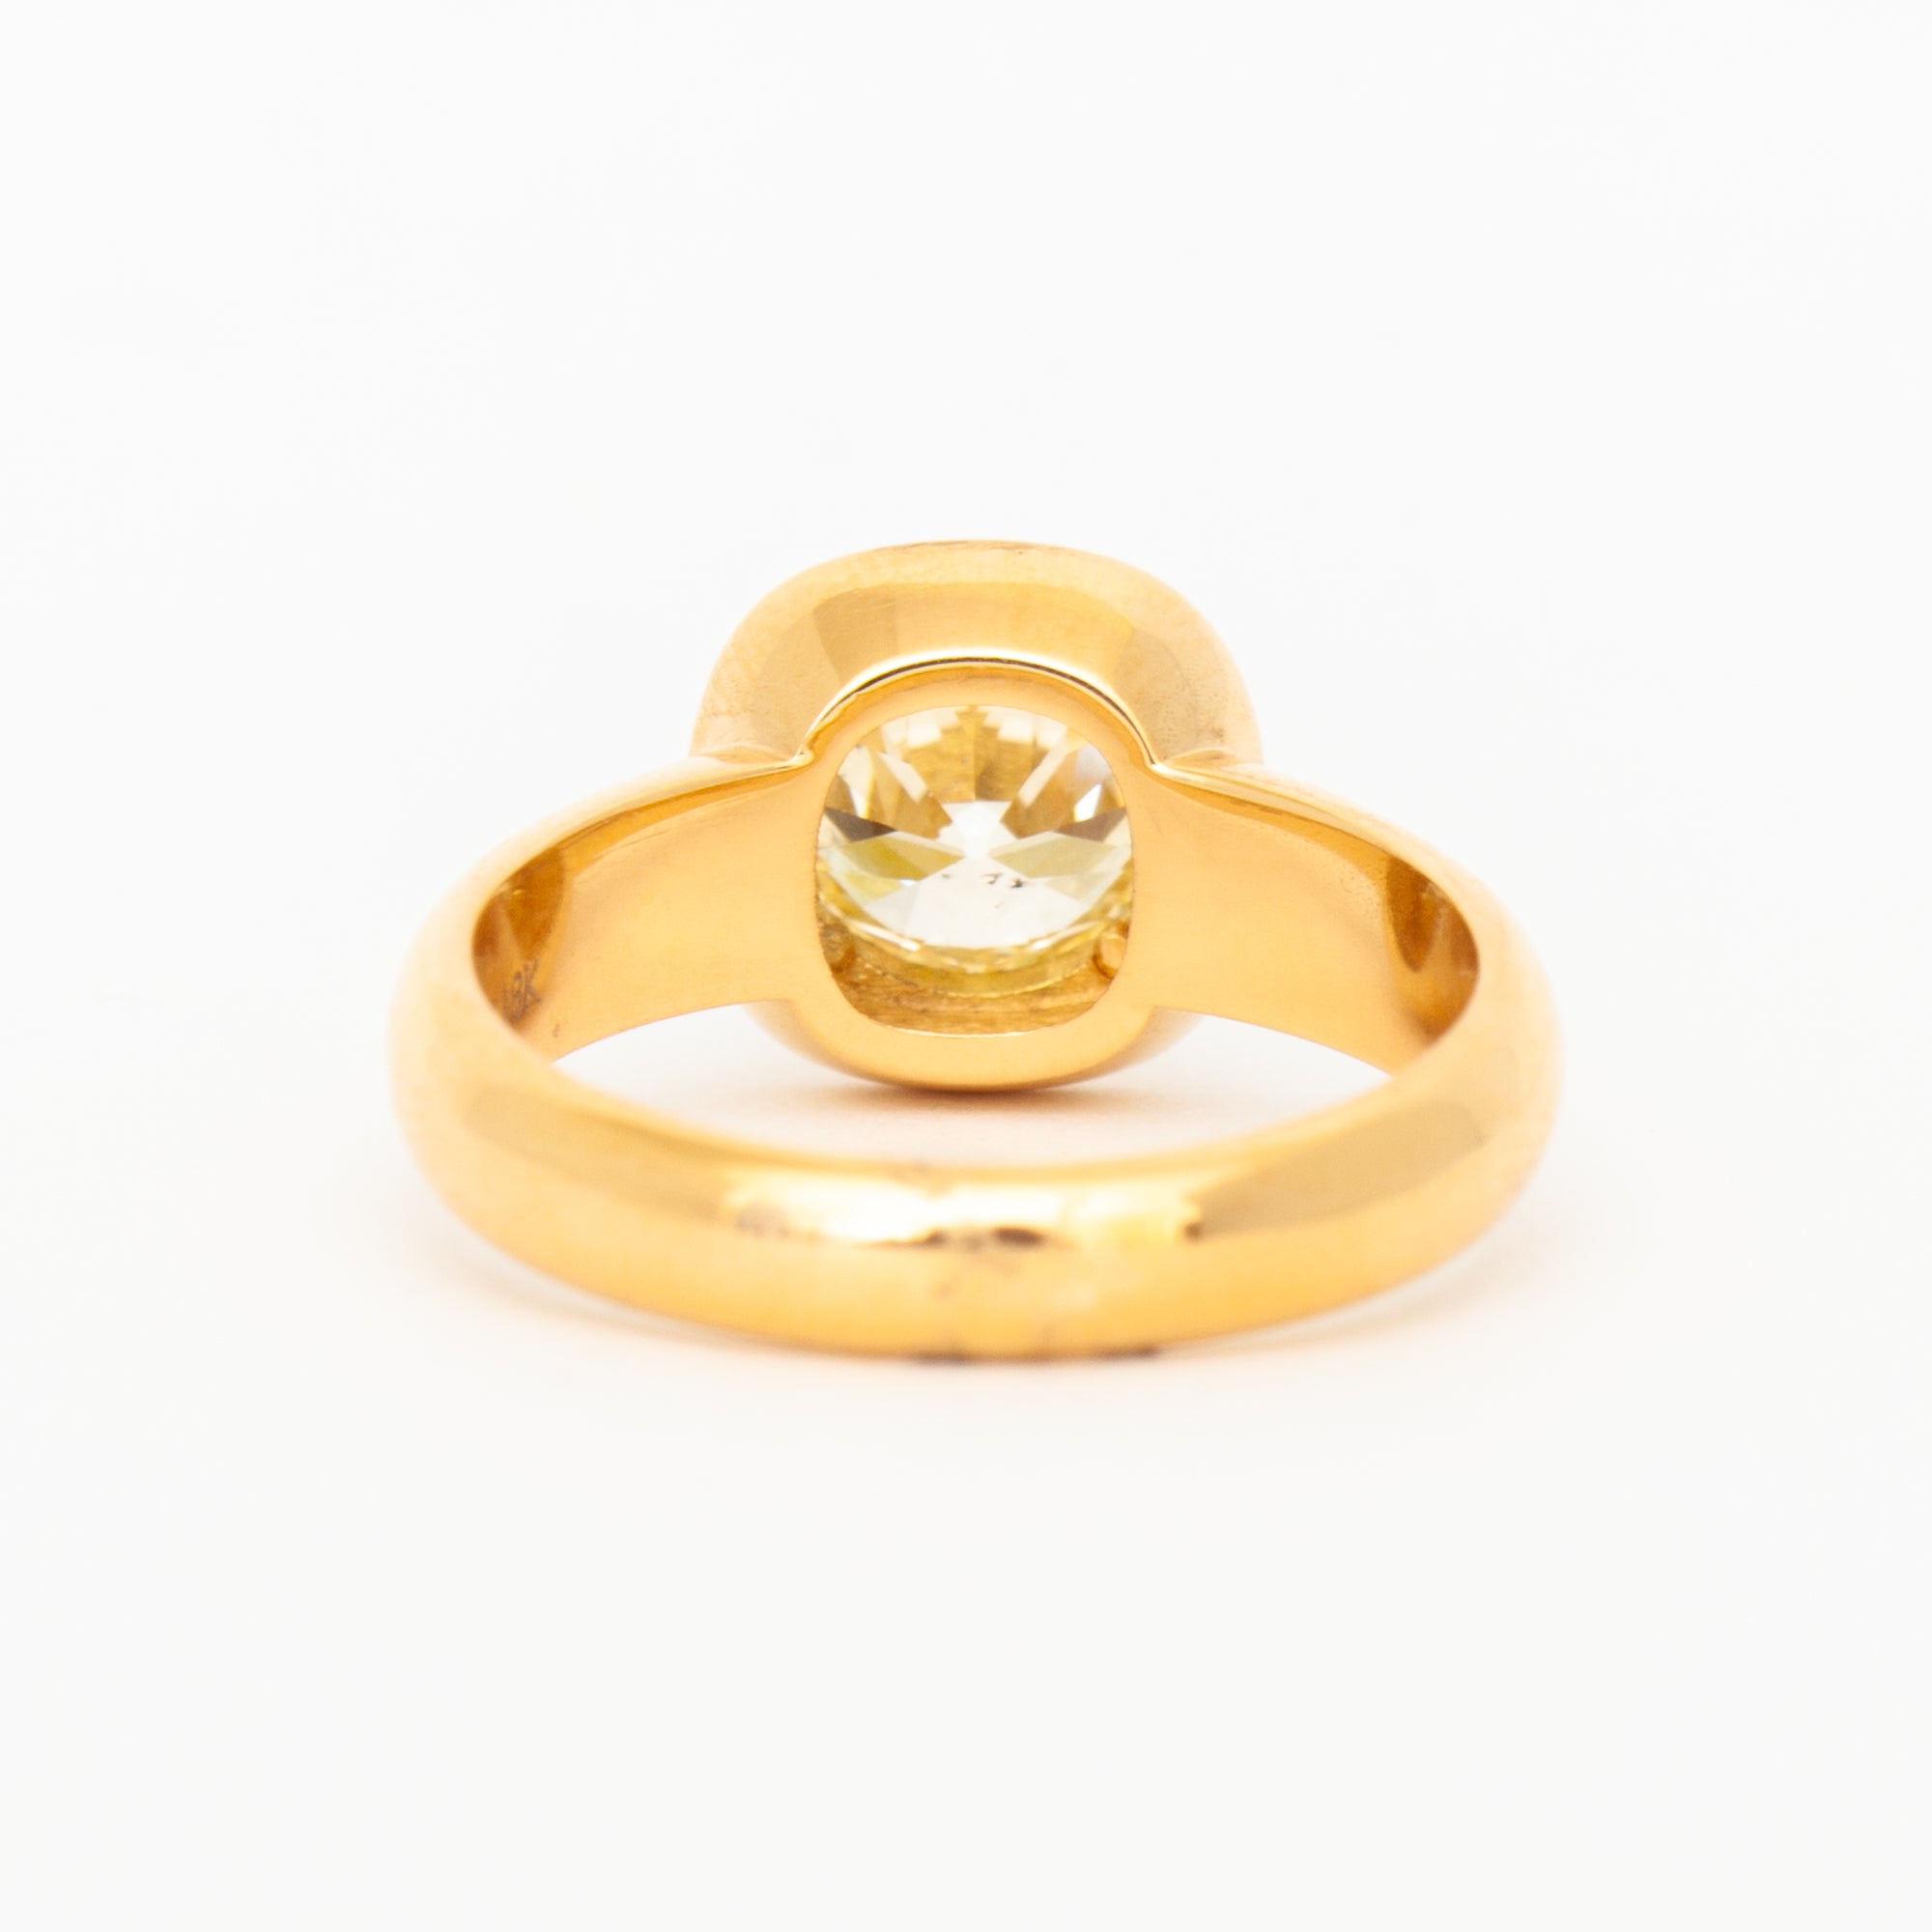 One Stone 22k Yellow Gold Ring 3.43gm | SEHGAL GOLD ORNAMENTS PVT. LTD.